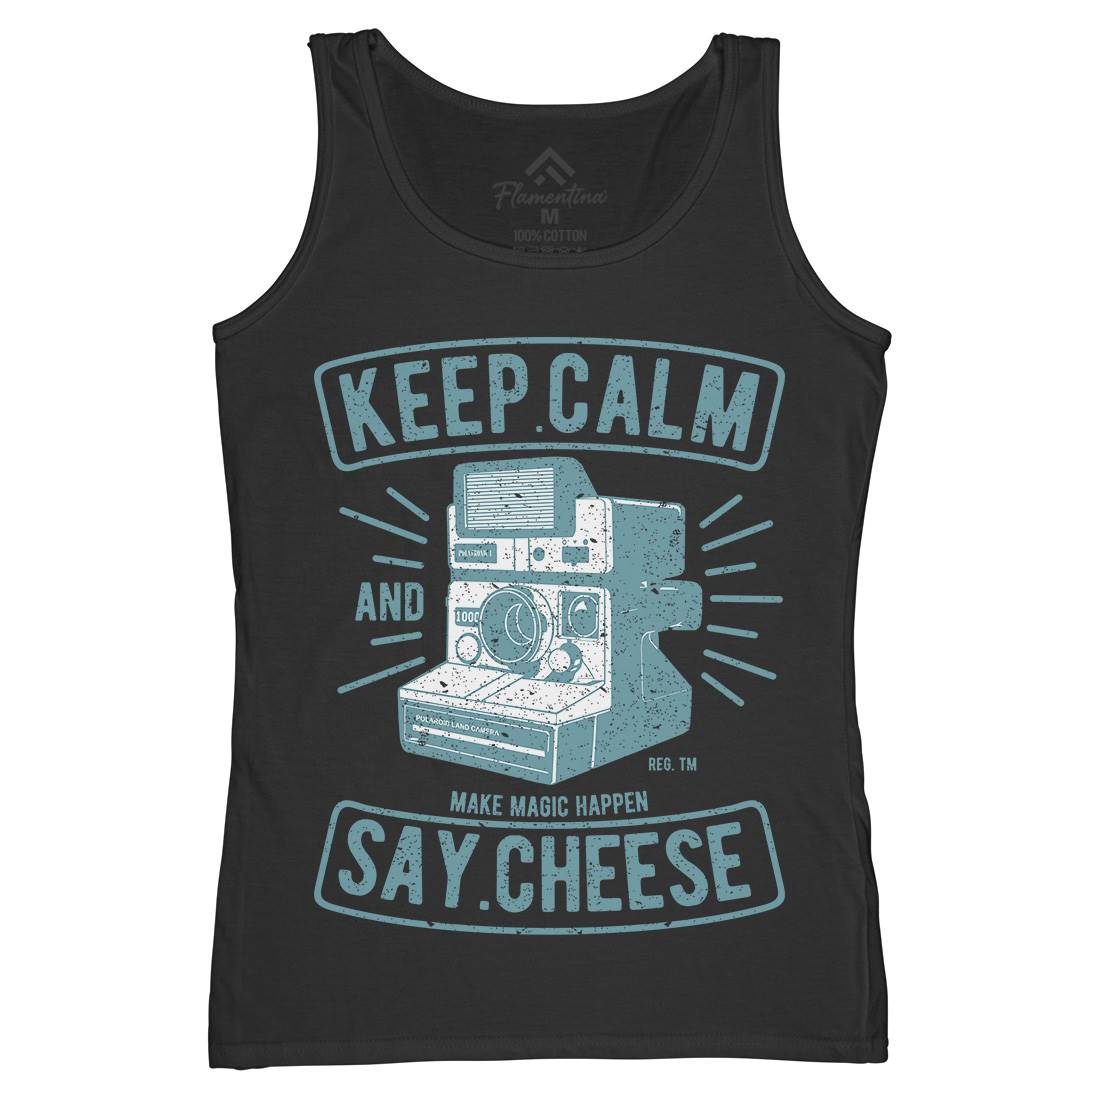 Keep Calm And Say Cheese Womens Organic Tank Top Vest Media A699